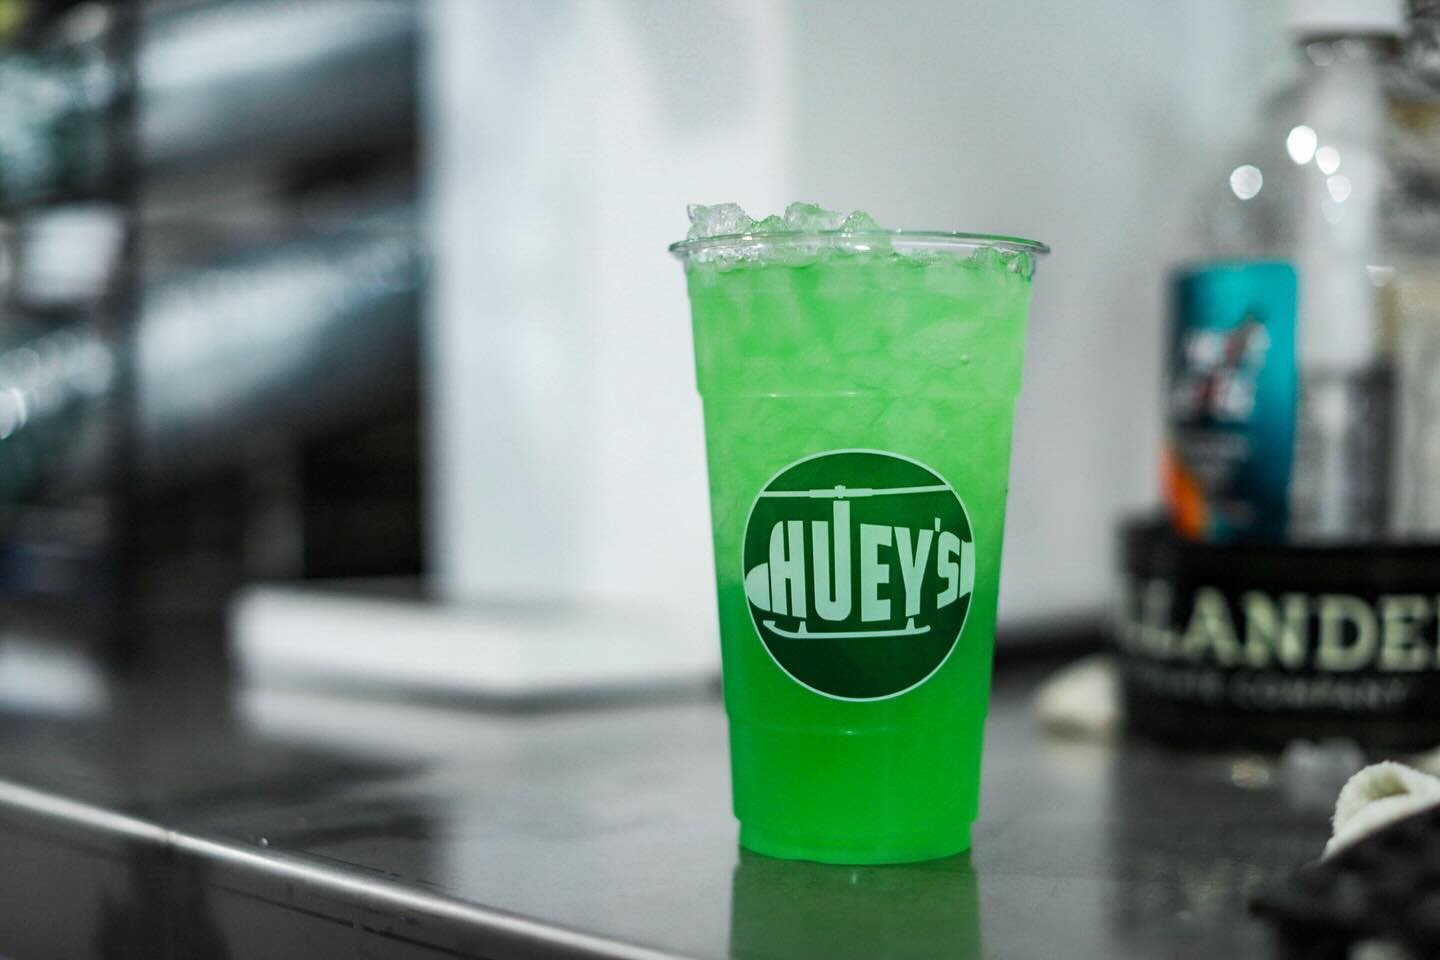 Happy St. Patrick&rsquo;s Day! Hope everyone is having a great weekend. Swing by Huey&rsquo;s and grab your favorite green drink!
&bull;
&bull;
&bull;
#hueyscoffee #hueys #stpatricksday